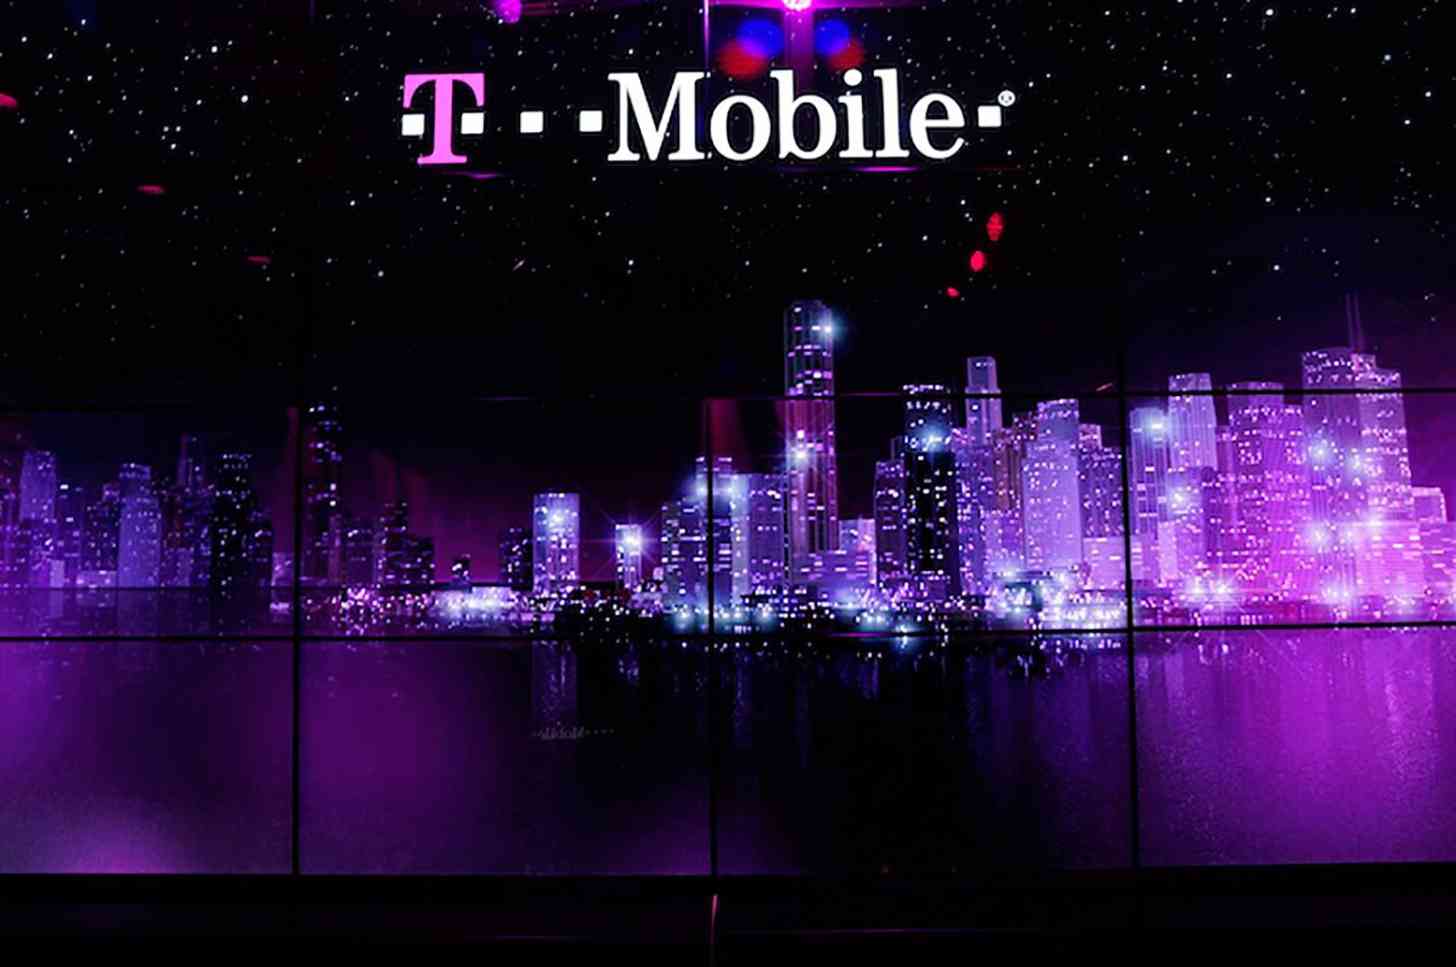 T-Mobile CES 2011 stage